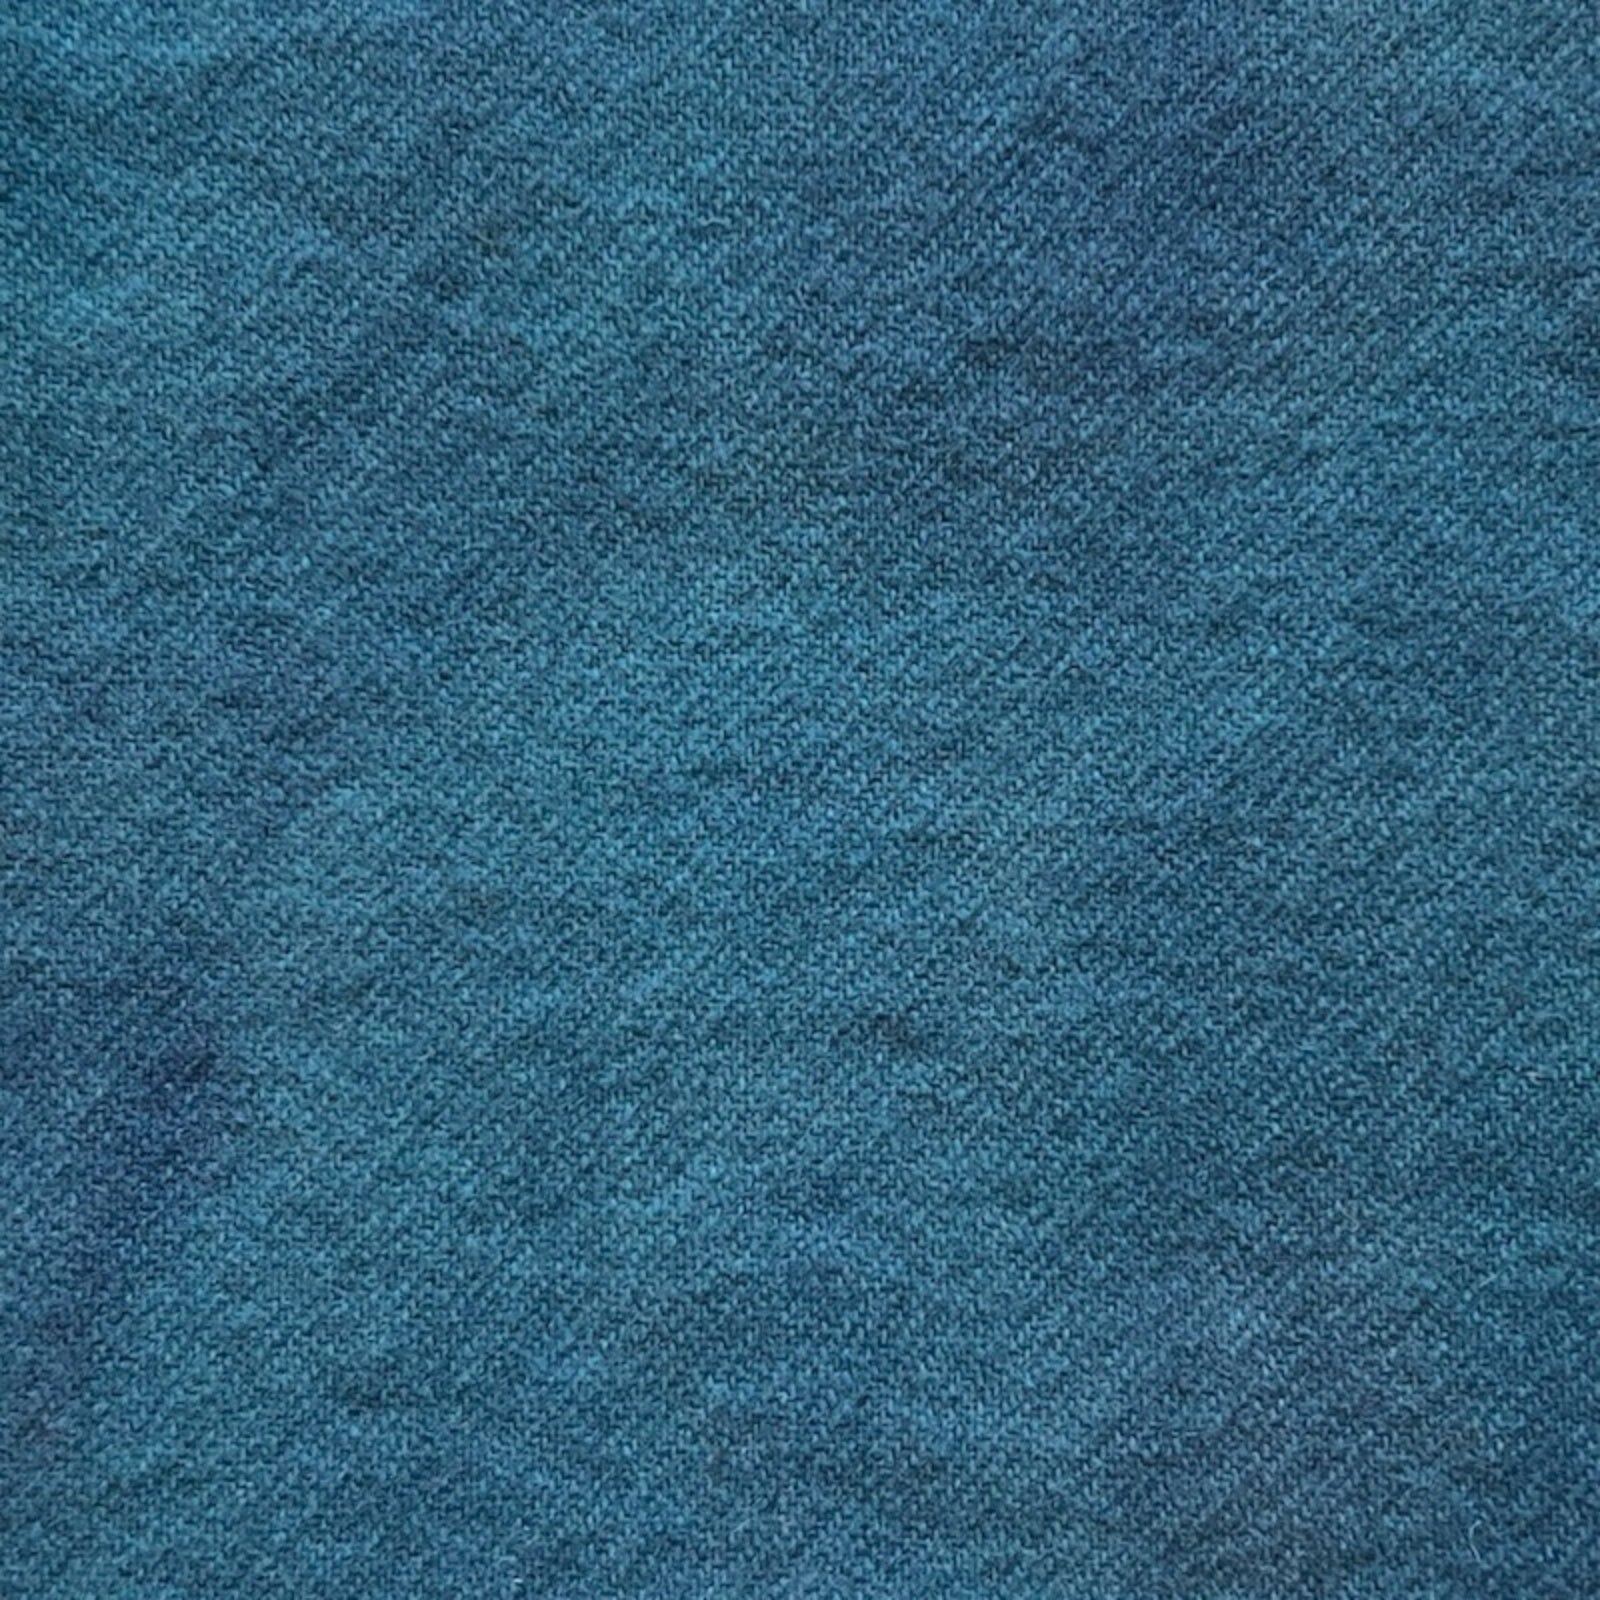 Forget-me-not - Colorama Hand Dyed Wool - Offered by HoneyBee Hive Rug Hooking